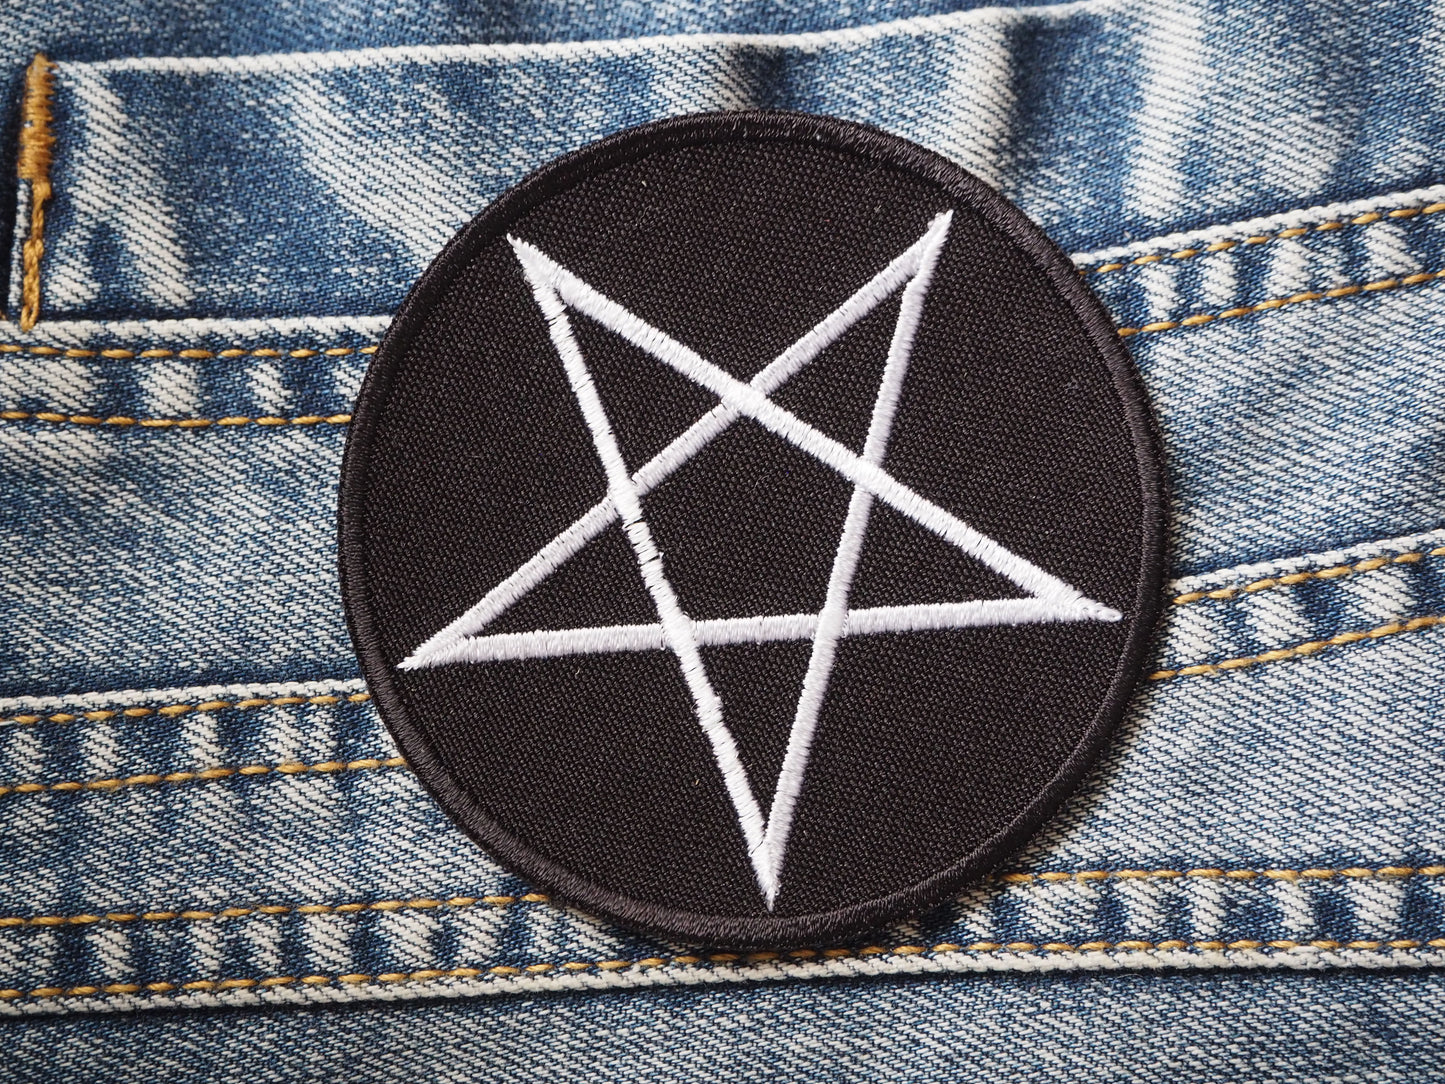 - Witch Occult Pentagram Embroidered Patch